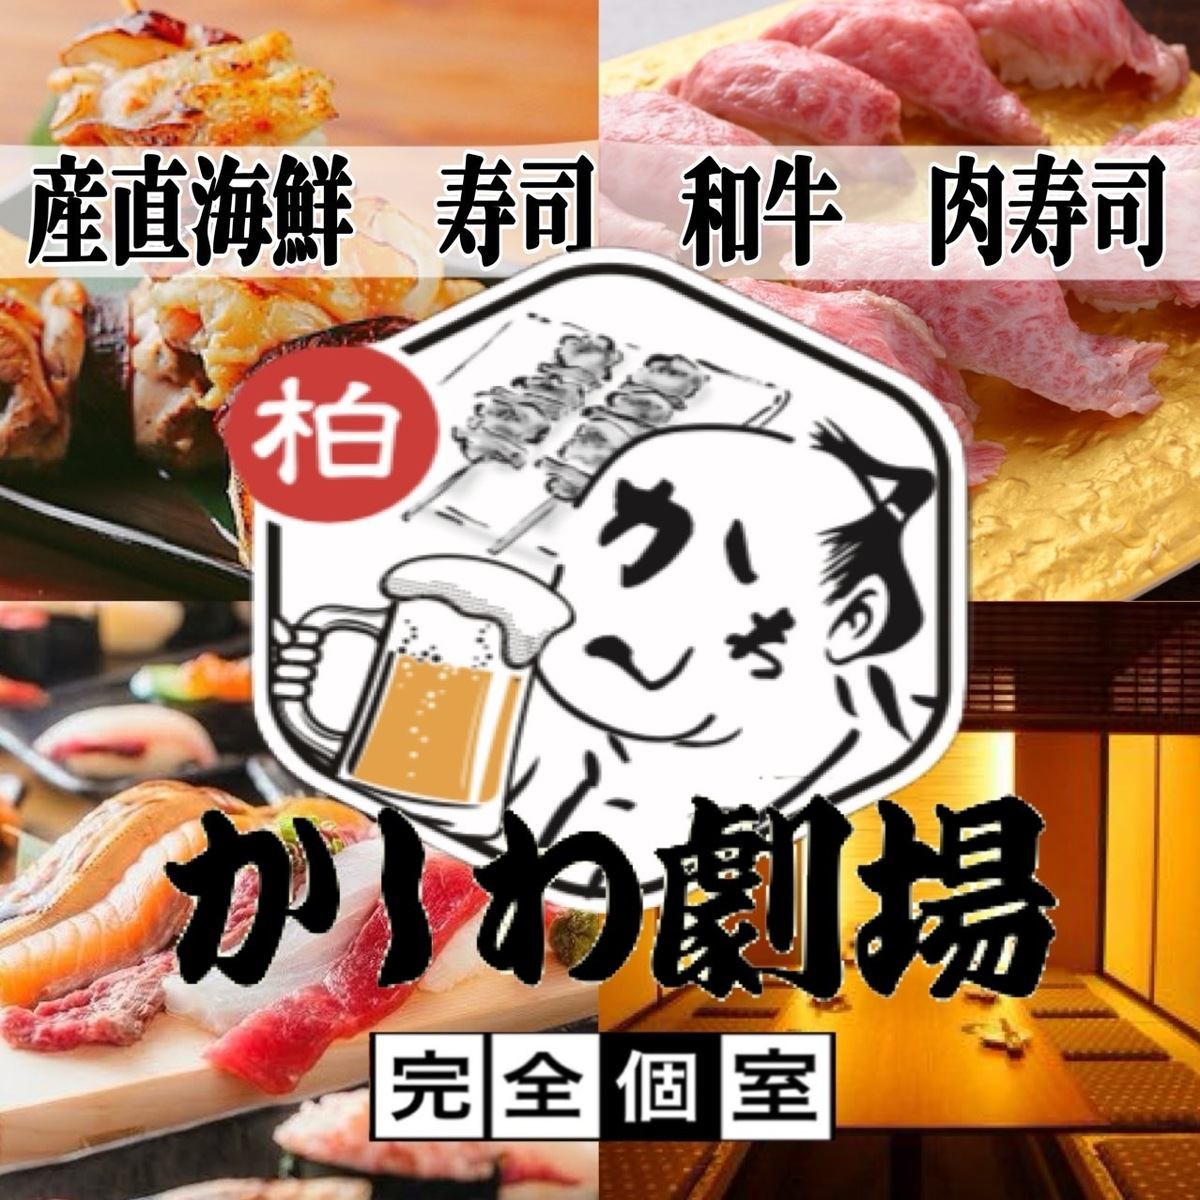 ★Near the east exit of Kashiwa Station! Authentic cuisine available in an all-you-can-eat and drink plan♪ 3 hours from 2,980 yen